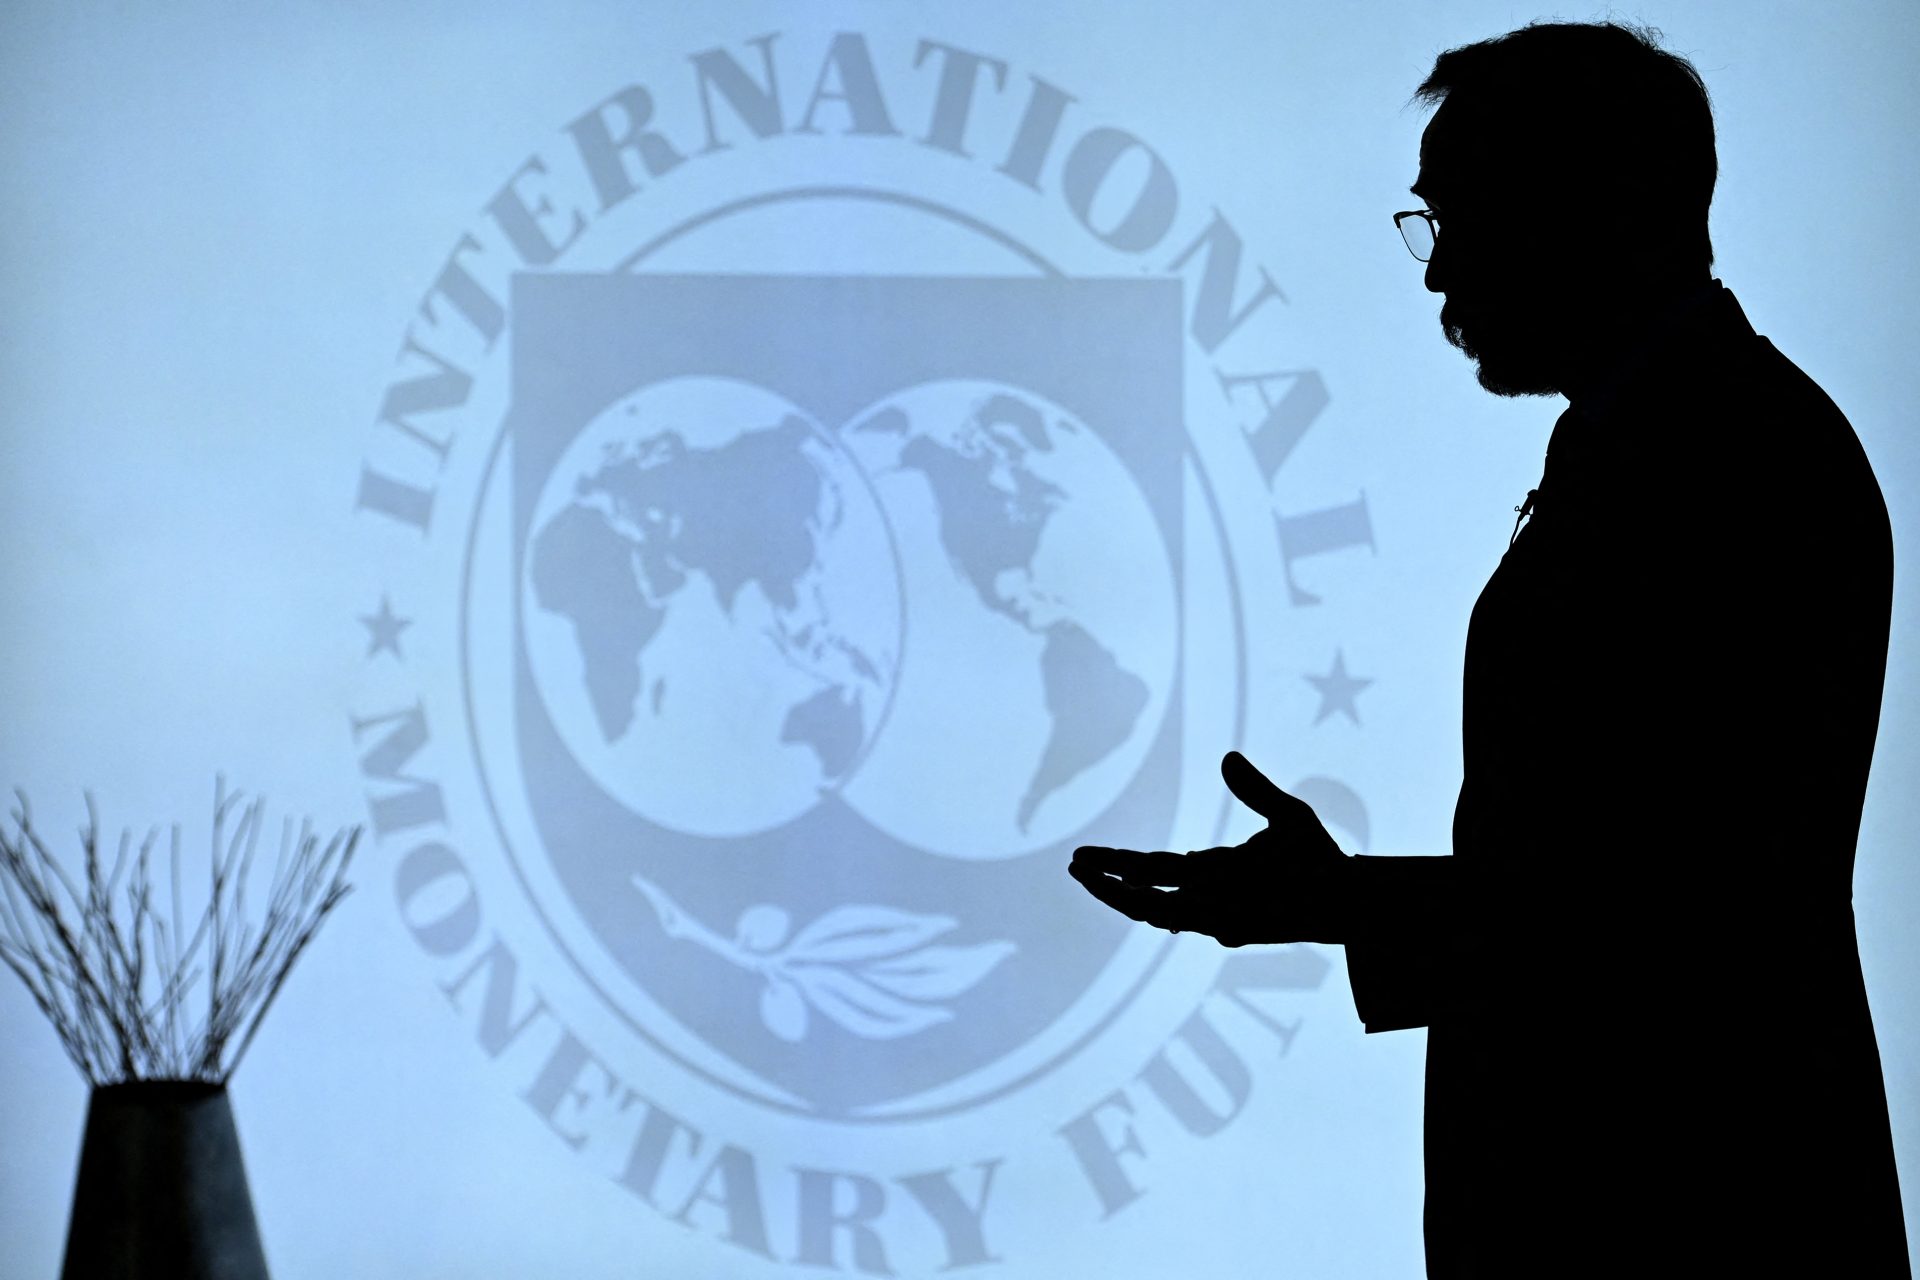  The IMF expresses concern